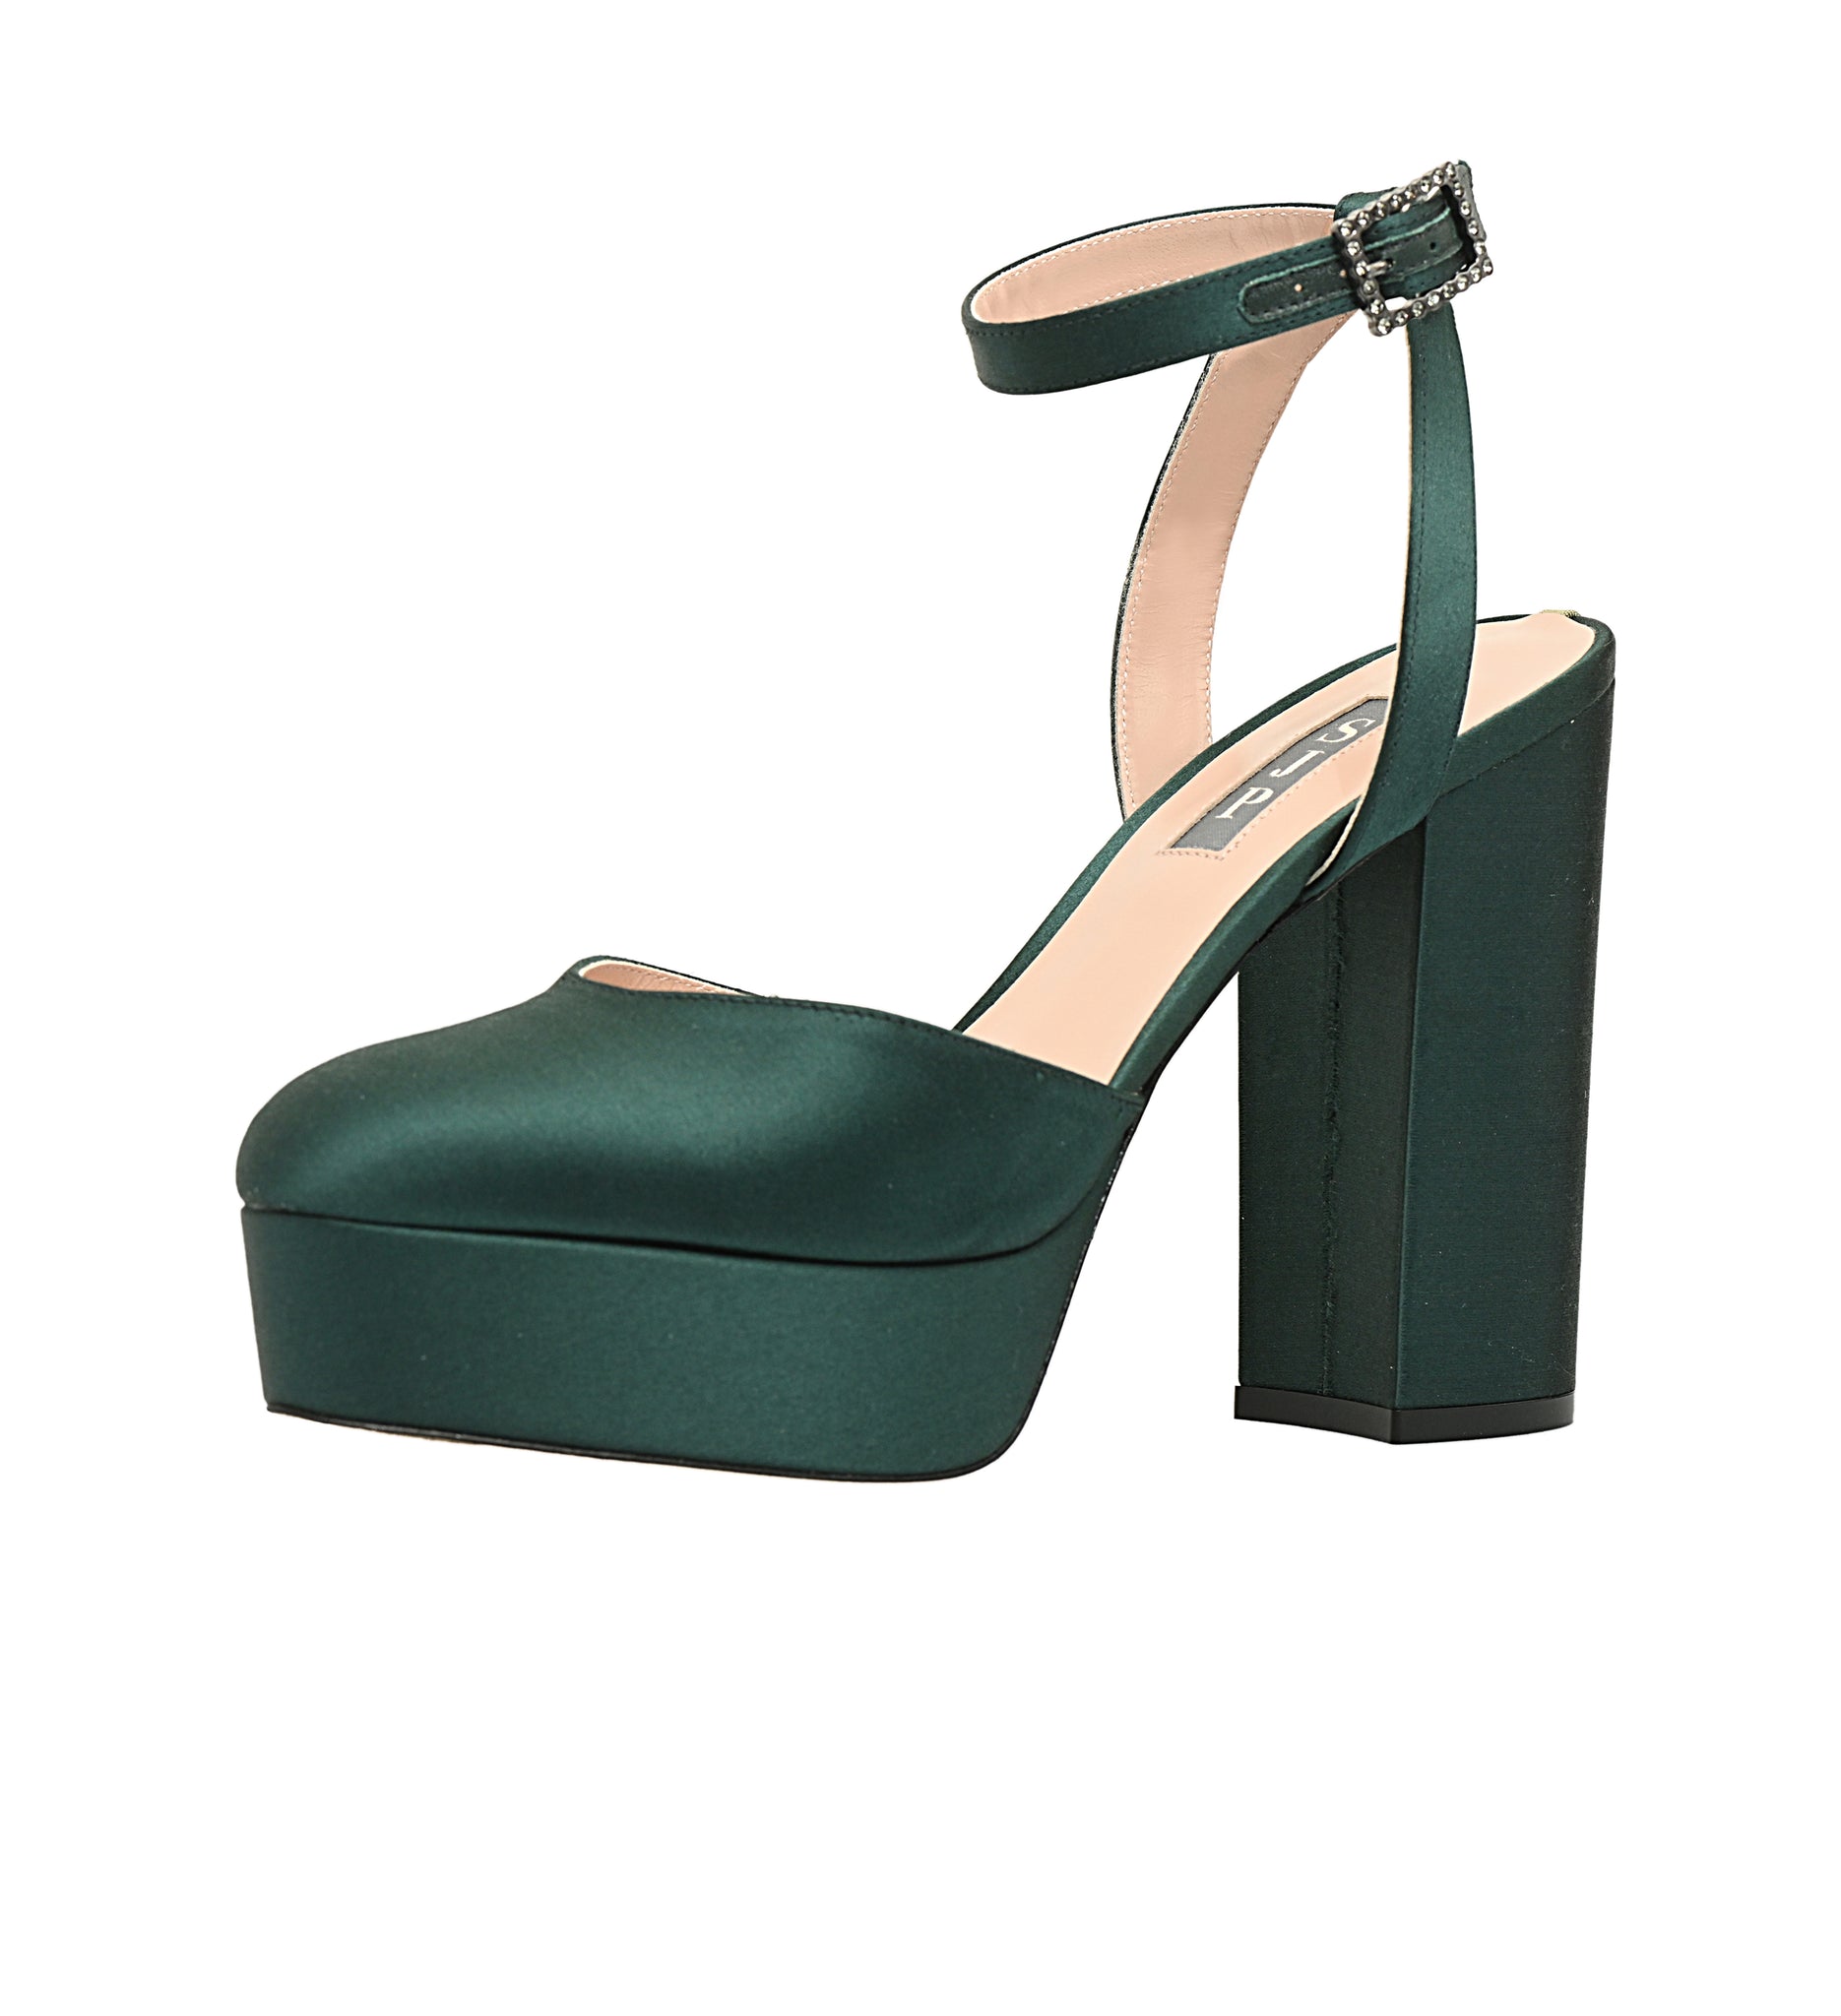 TiffanyD: Classic and Fun OOTD New SJP shoes